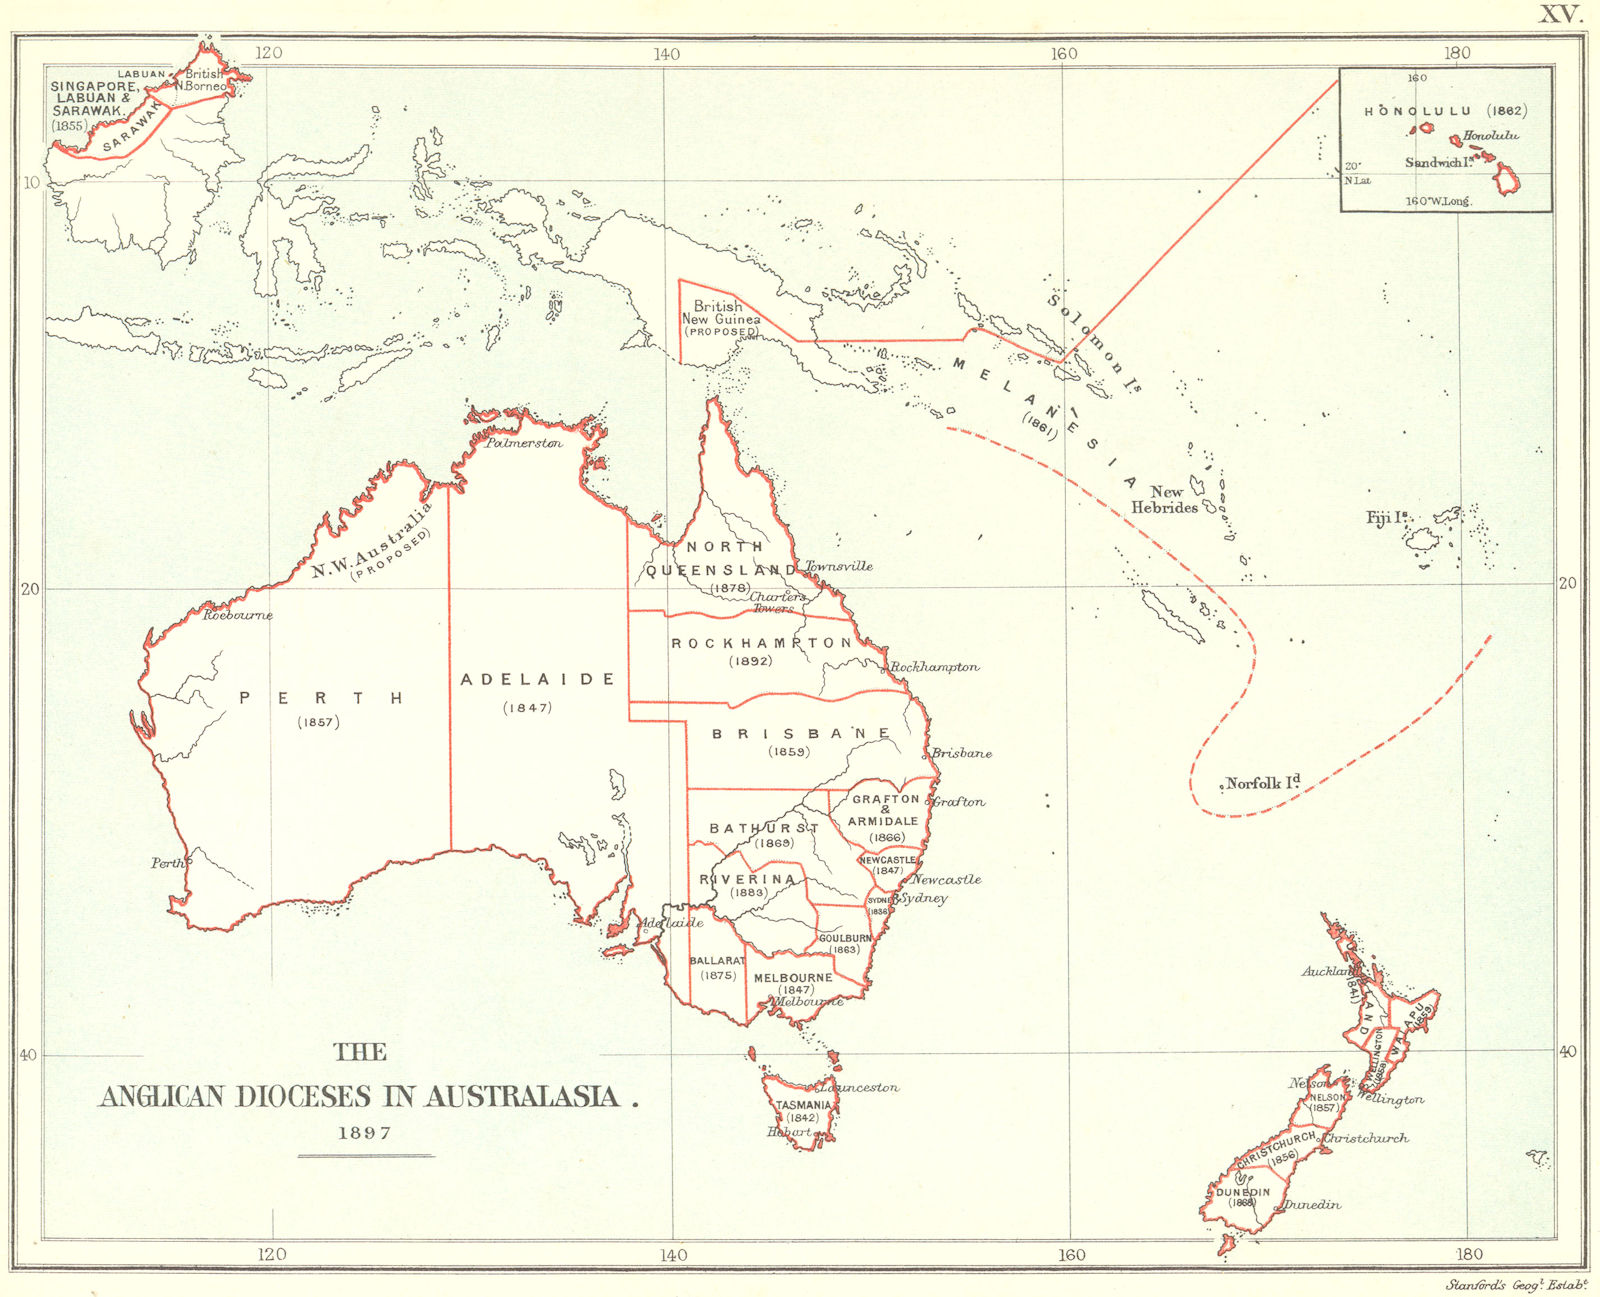 ANGLICAN CHURCH DIOCESES IN AUSTRALASIA. Australia New Zealand Hawaii 1897 map